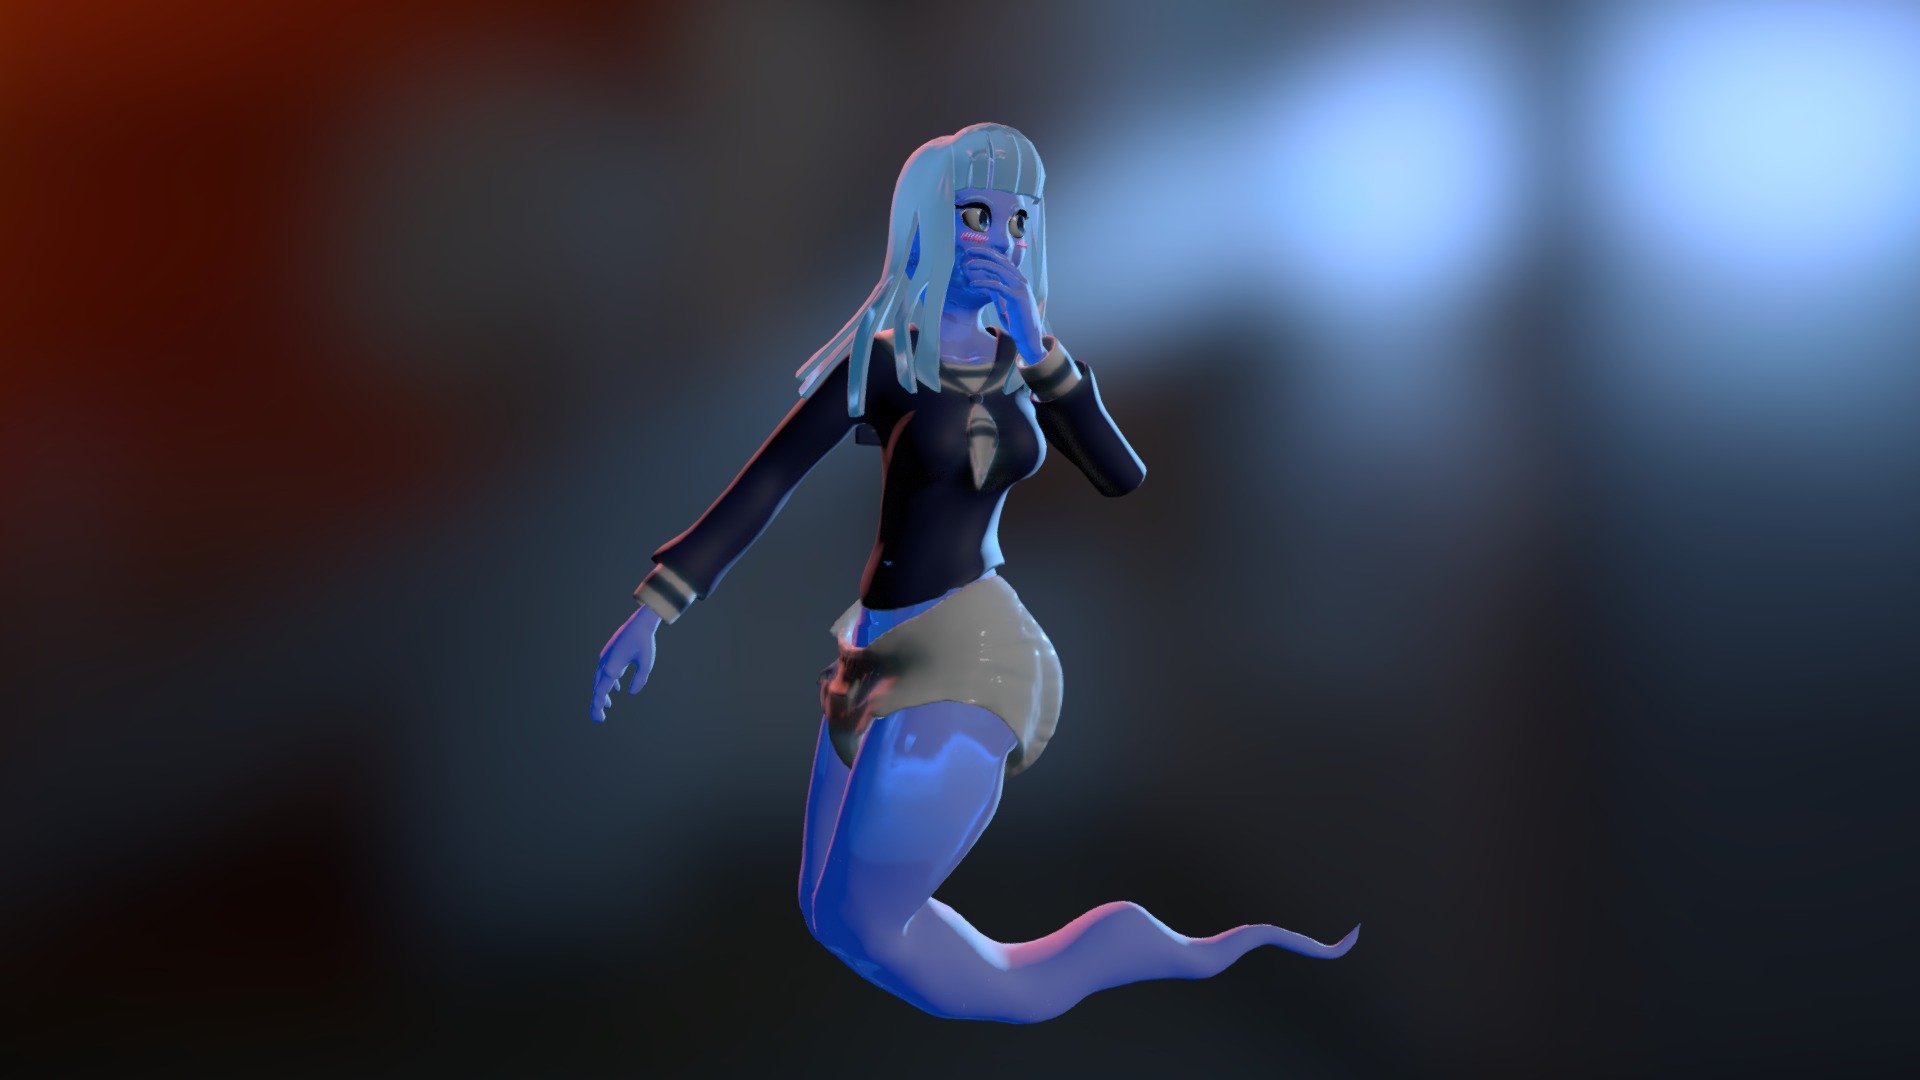 Decided to work on this years sculpt january. this is the first days post themed Spectral, its about a ghost girl, its a fan art to Boo Bella - SculptJanuary 2020 - Day 01 - Spectral - 3D model by pelusDiaper 3d model